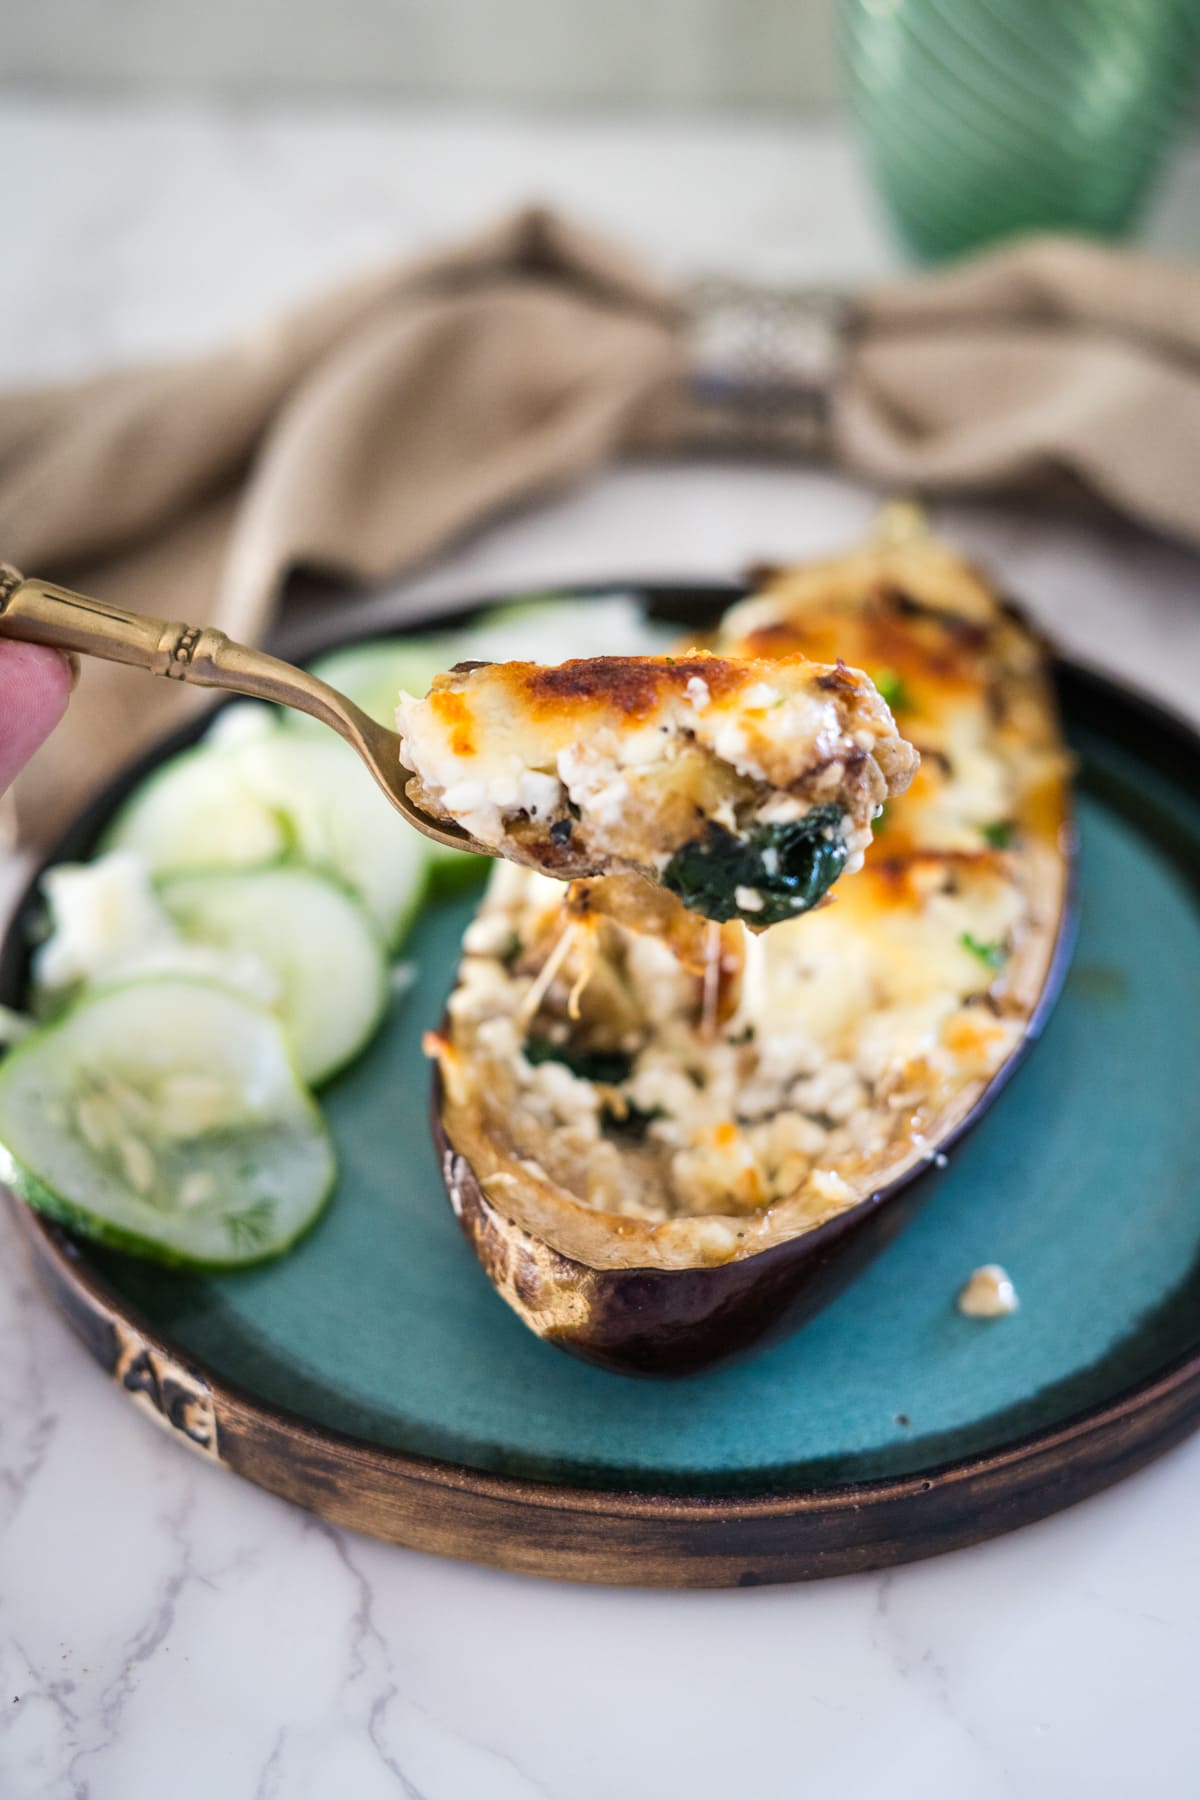 Eggplant boats stuffed with cheese and spinach on a plate.